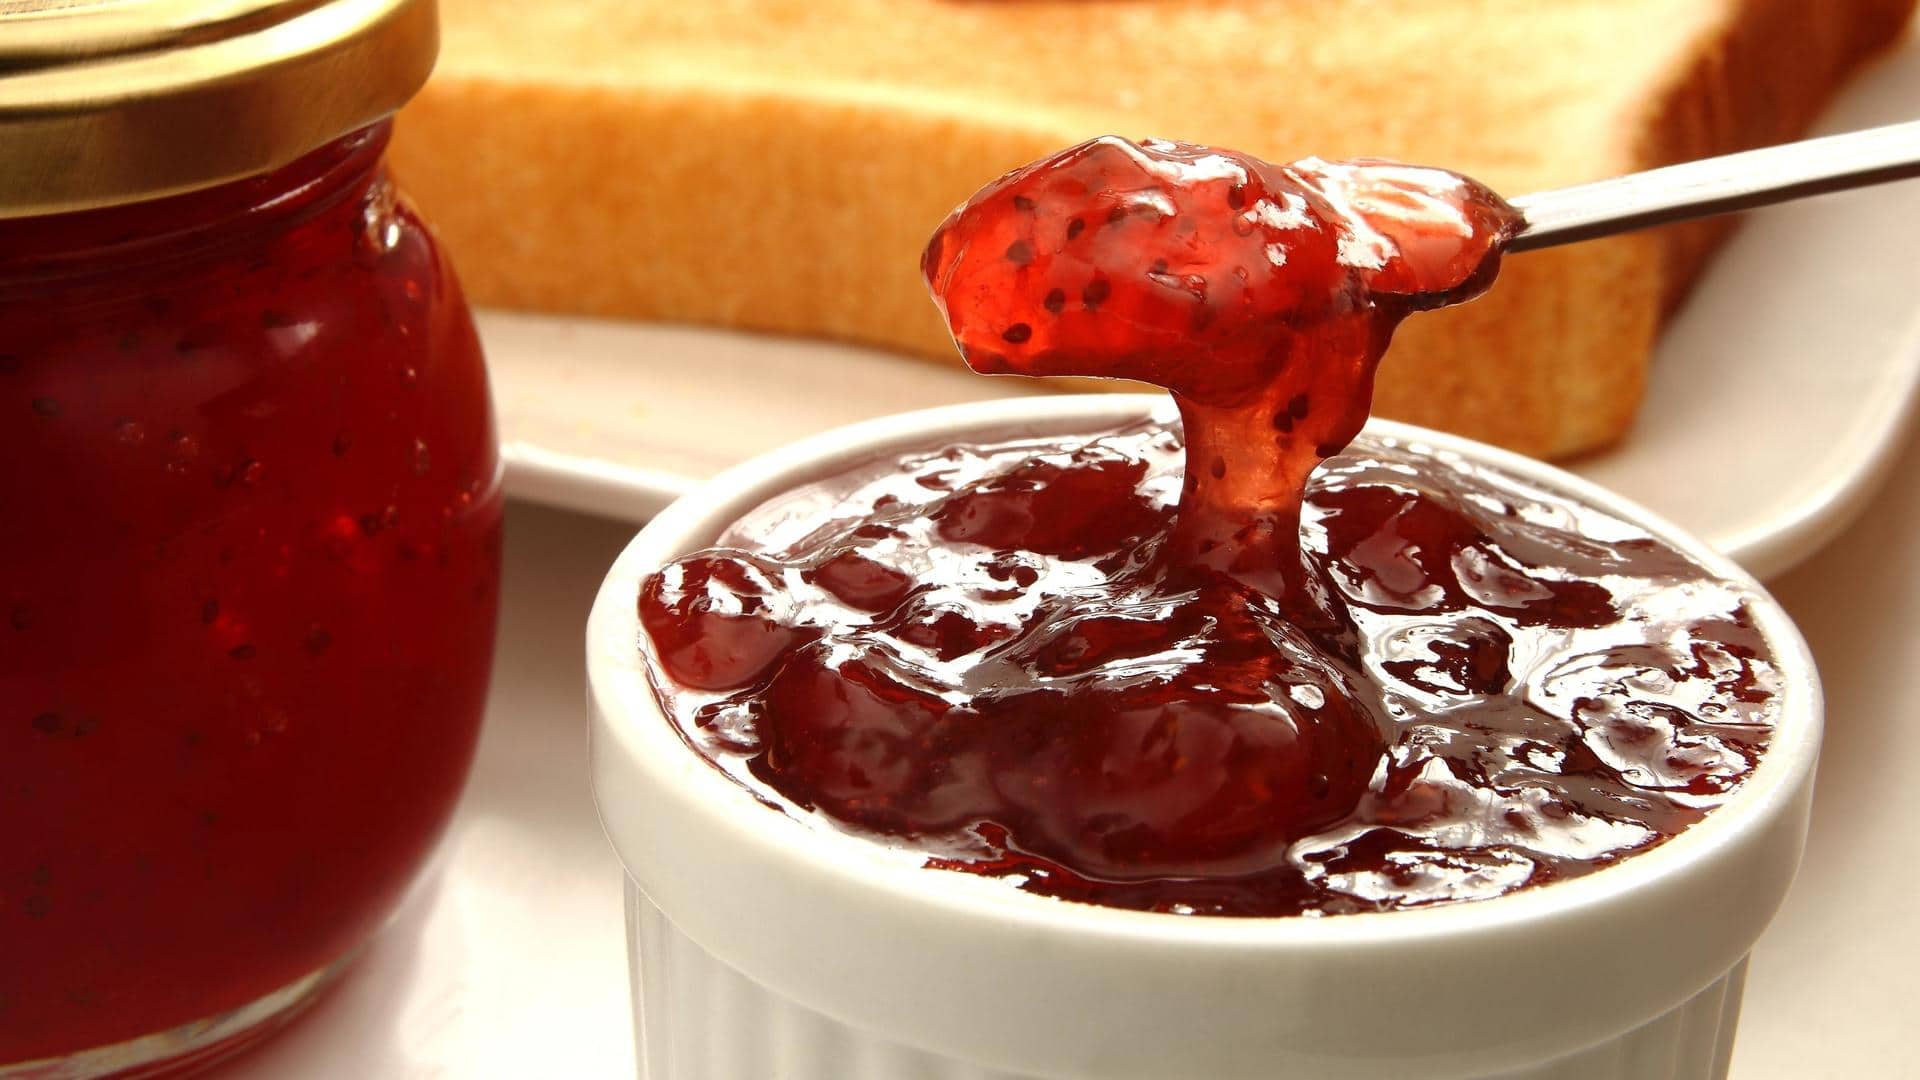 Spend winter in flavor with these 5 jam recipes